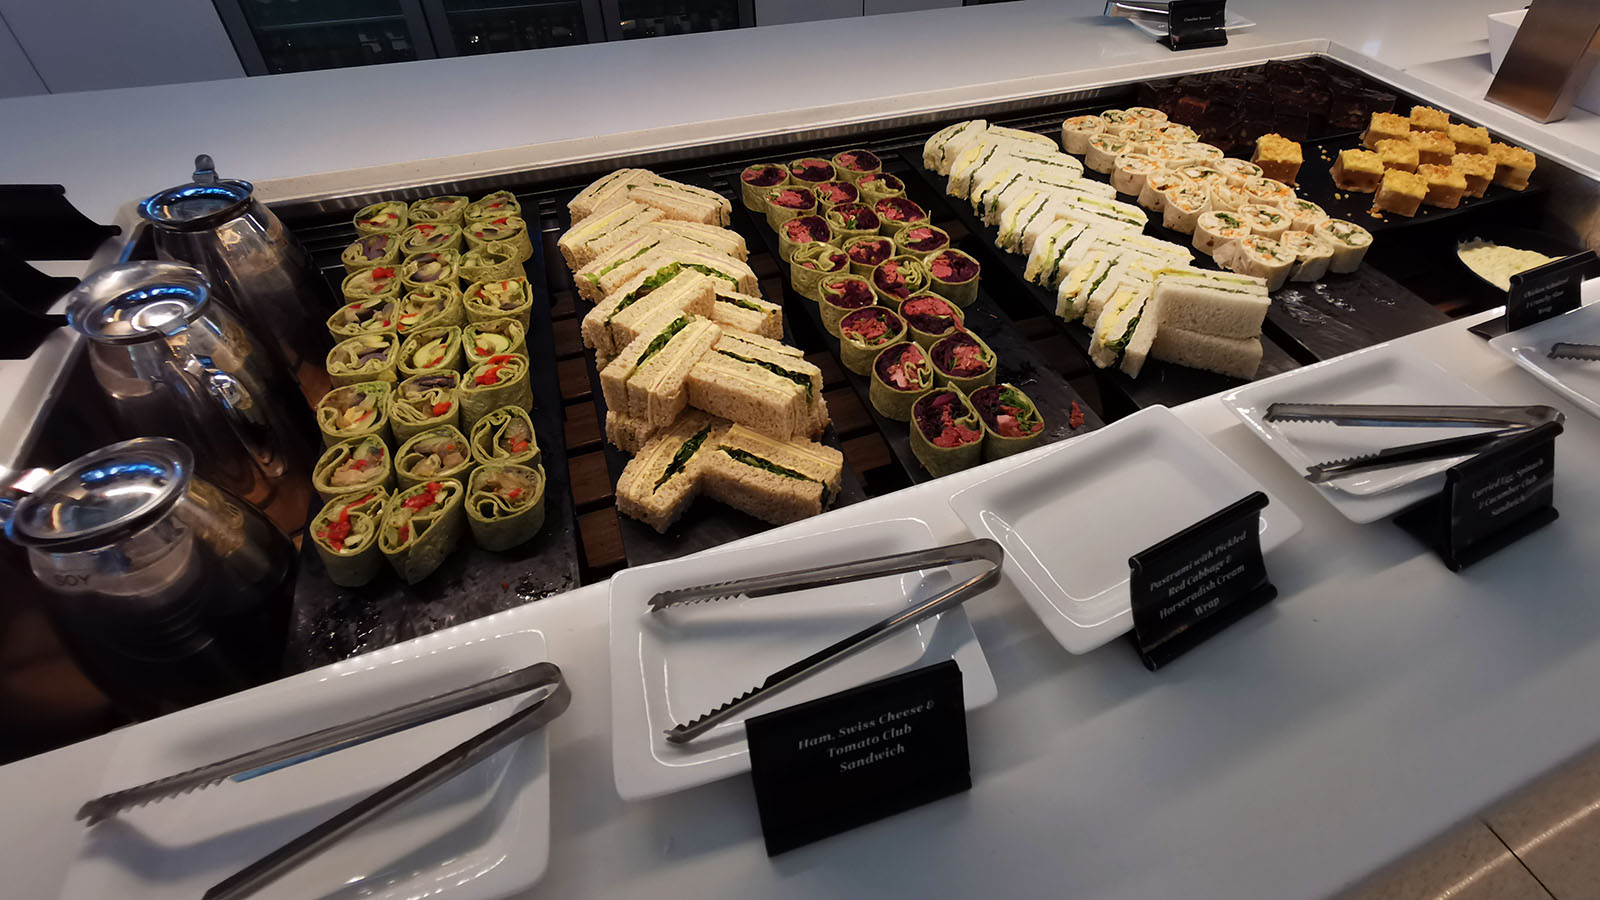 Sandwiches at the Air New Zealand Business Premier lounge in Brisbane